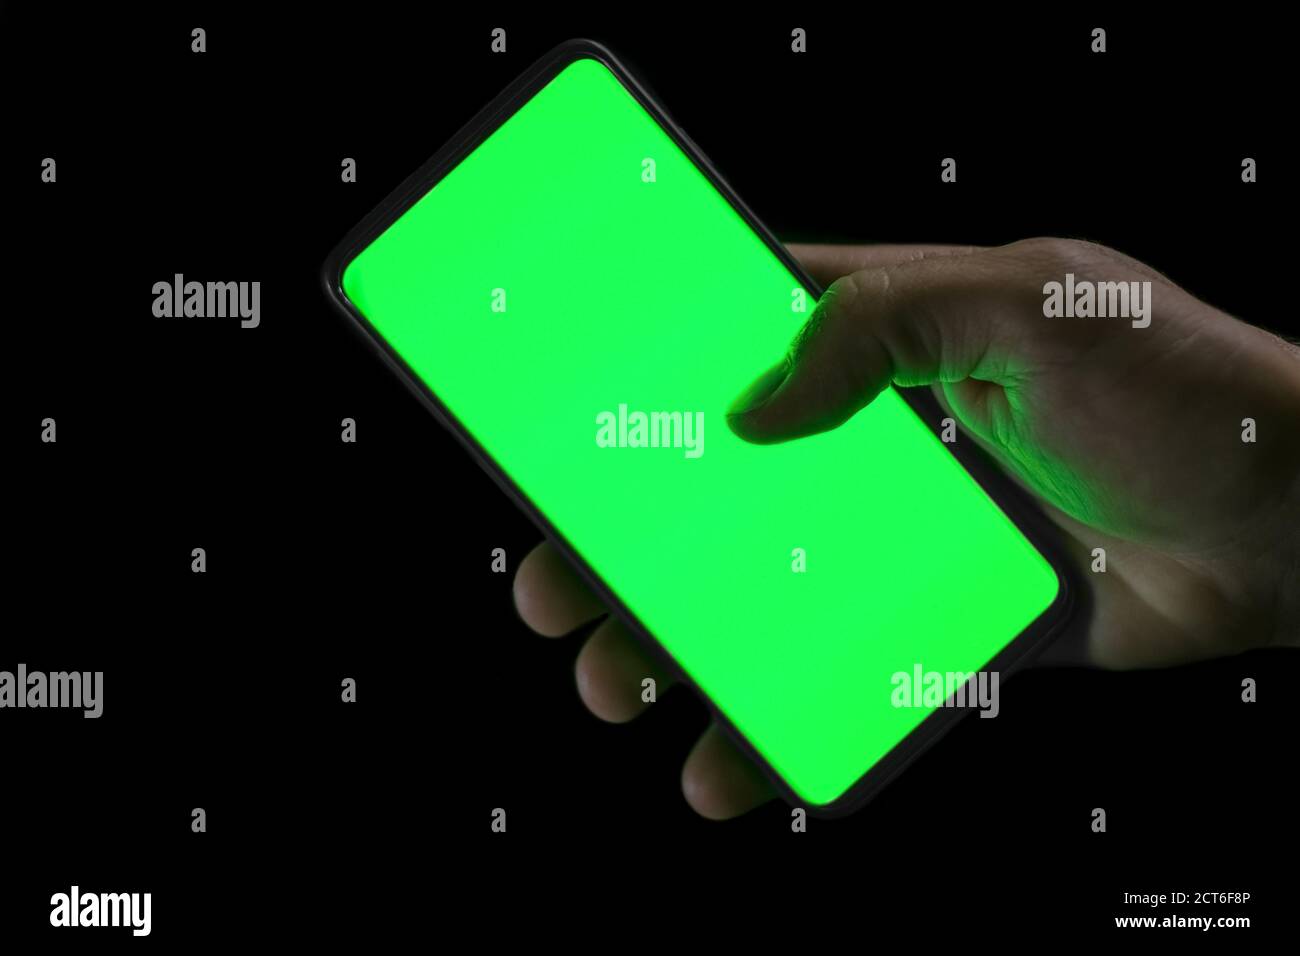 Isolated human hand holding a green screen smartphone on black background,hi tech addiction concept Stock Photo